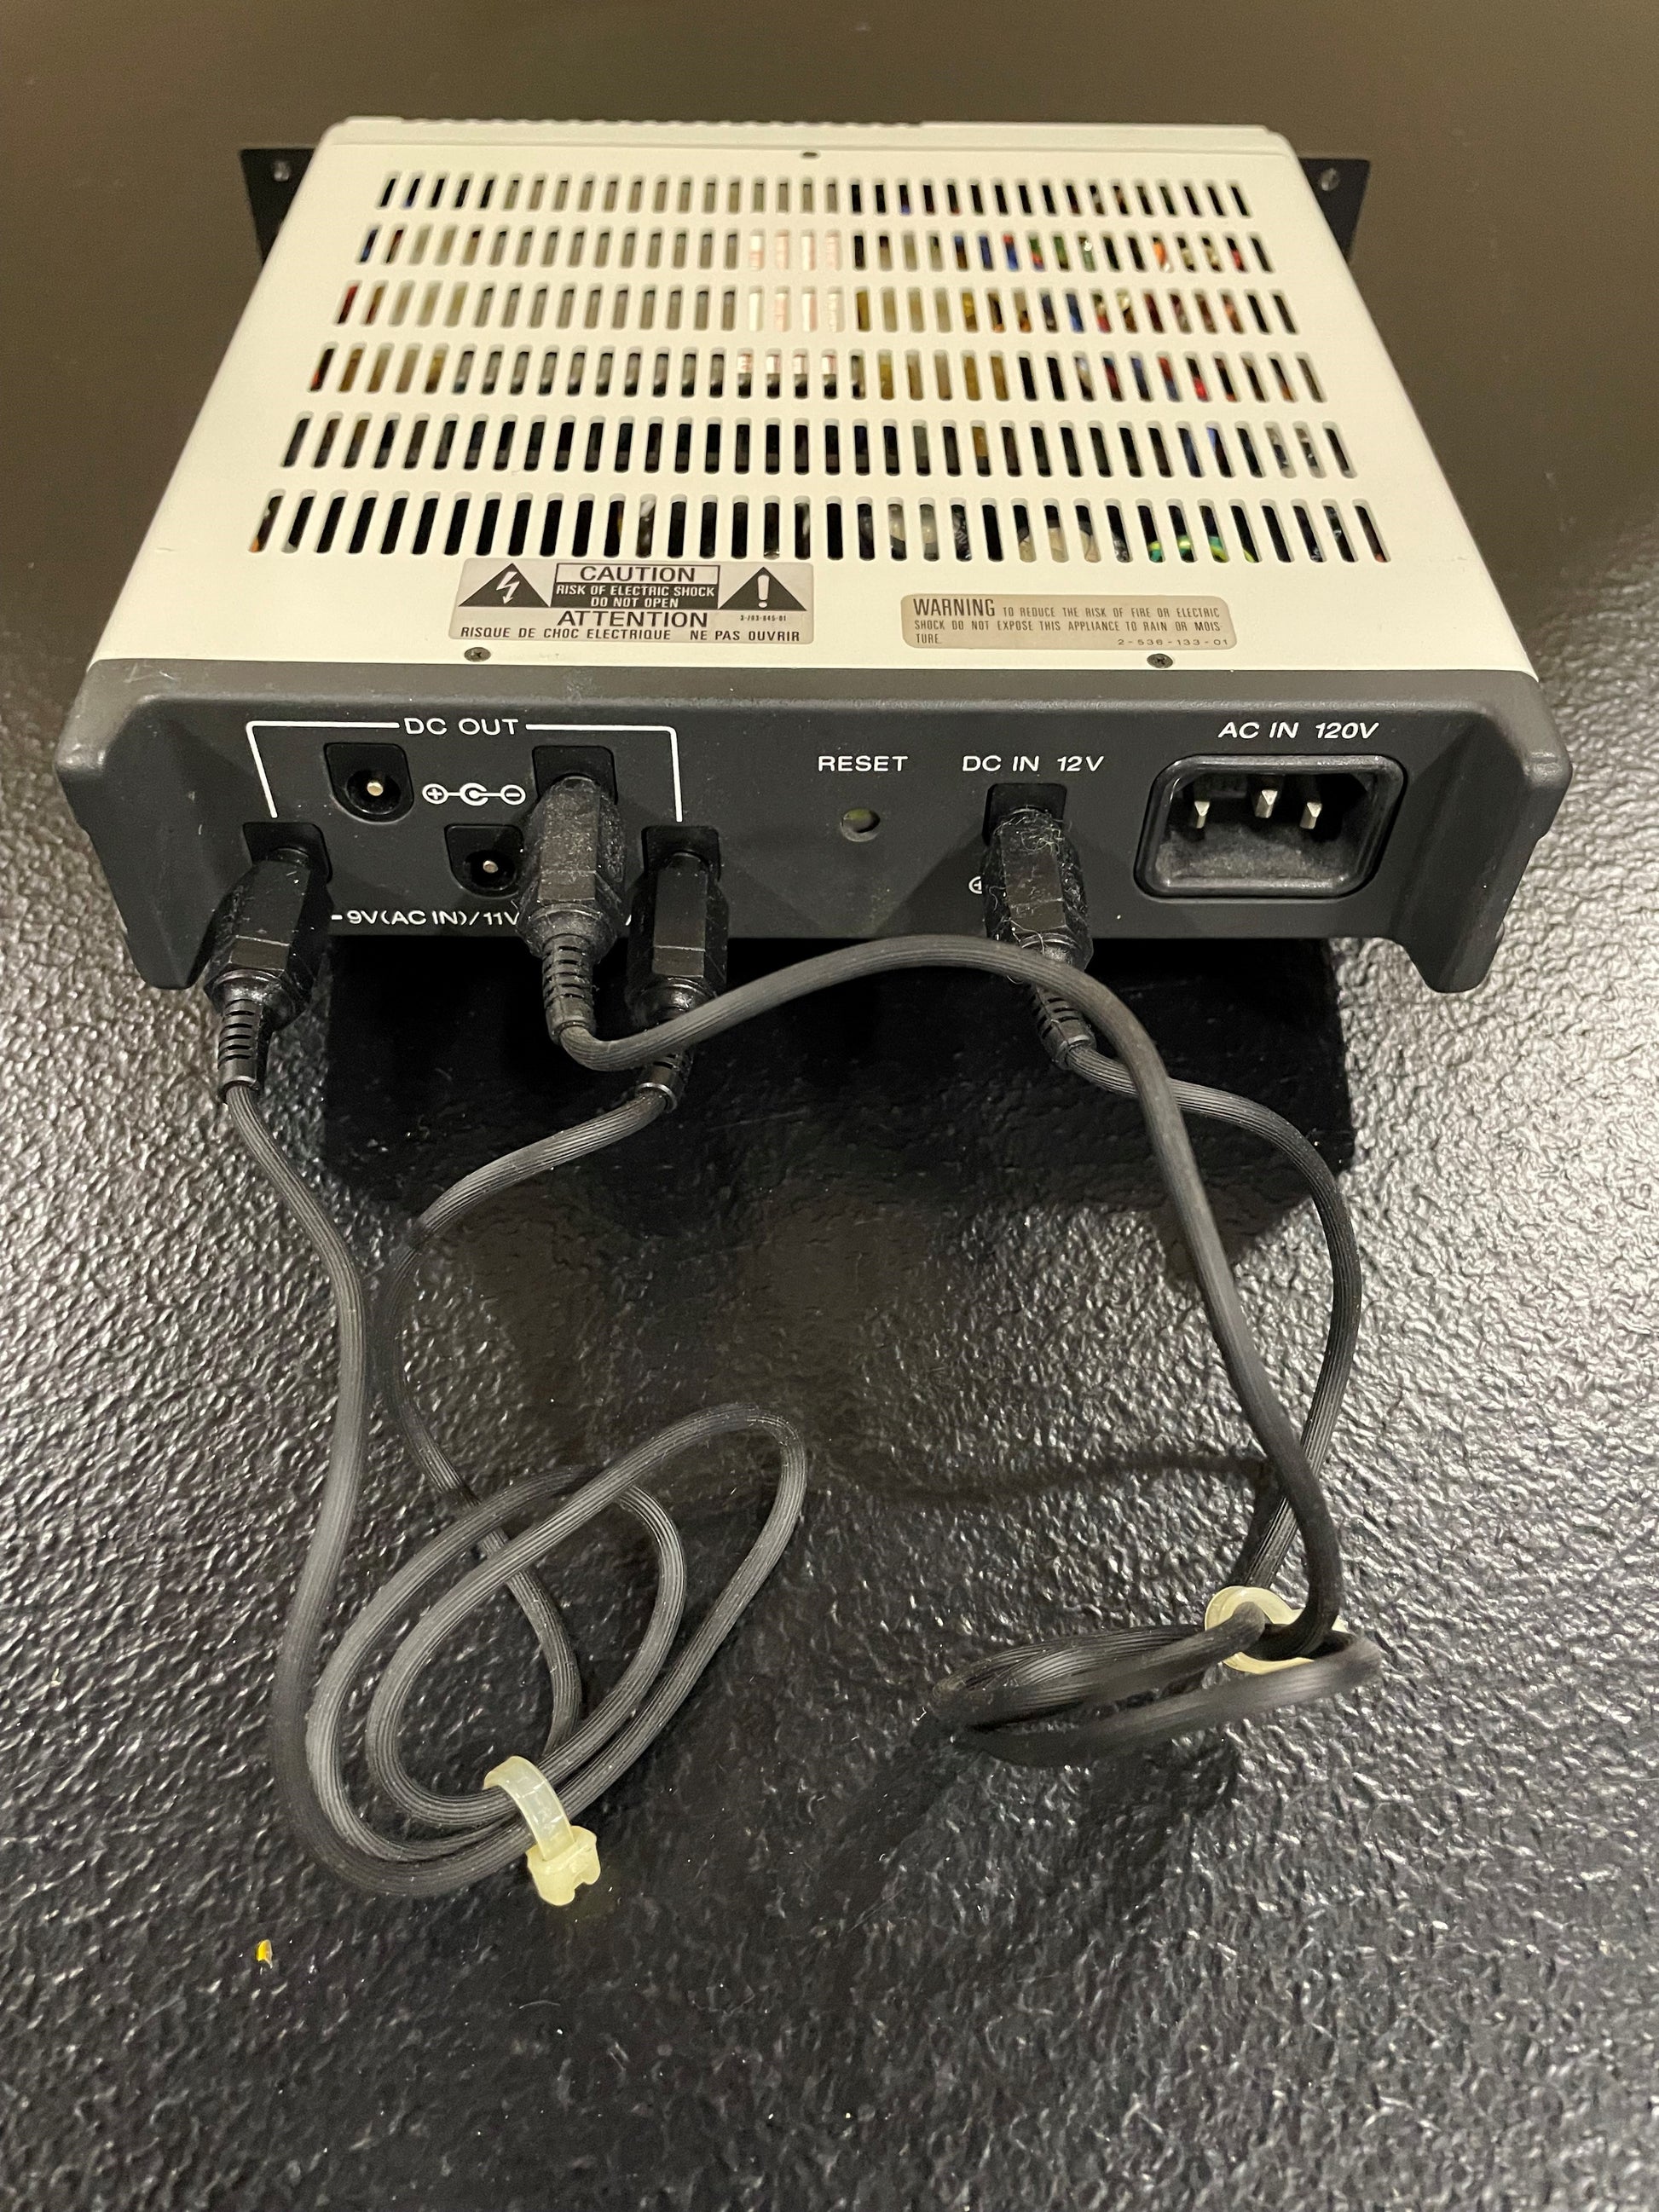 SONY AC-P210 Power Supply. We Sell Professional Audio Equipment. Audio Systems, Amplifiers, Consoles, Mixers, Electronics, Entertainment, Live Sound.